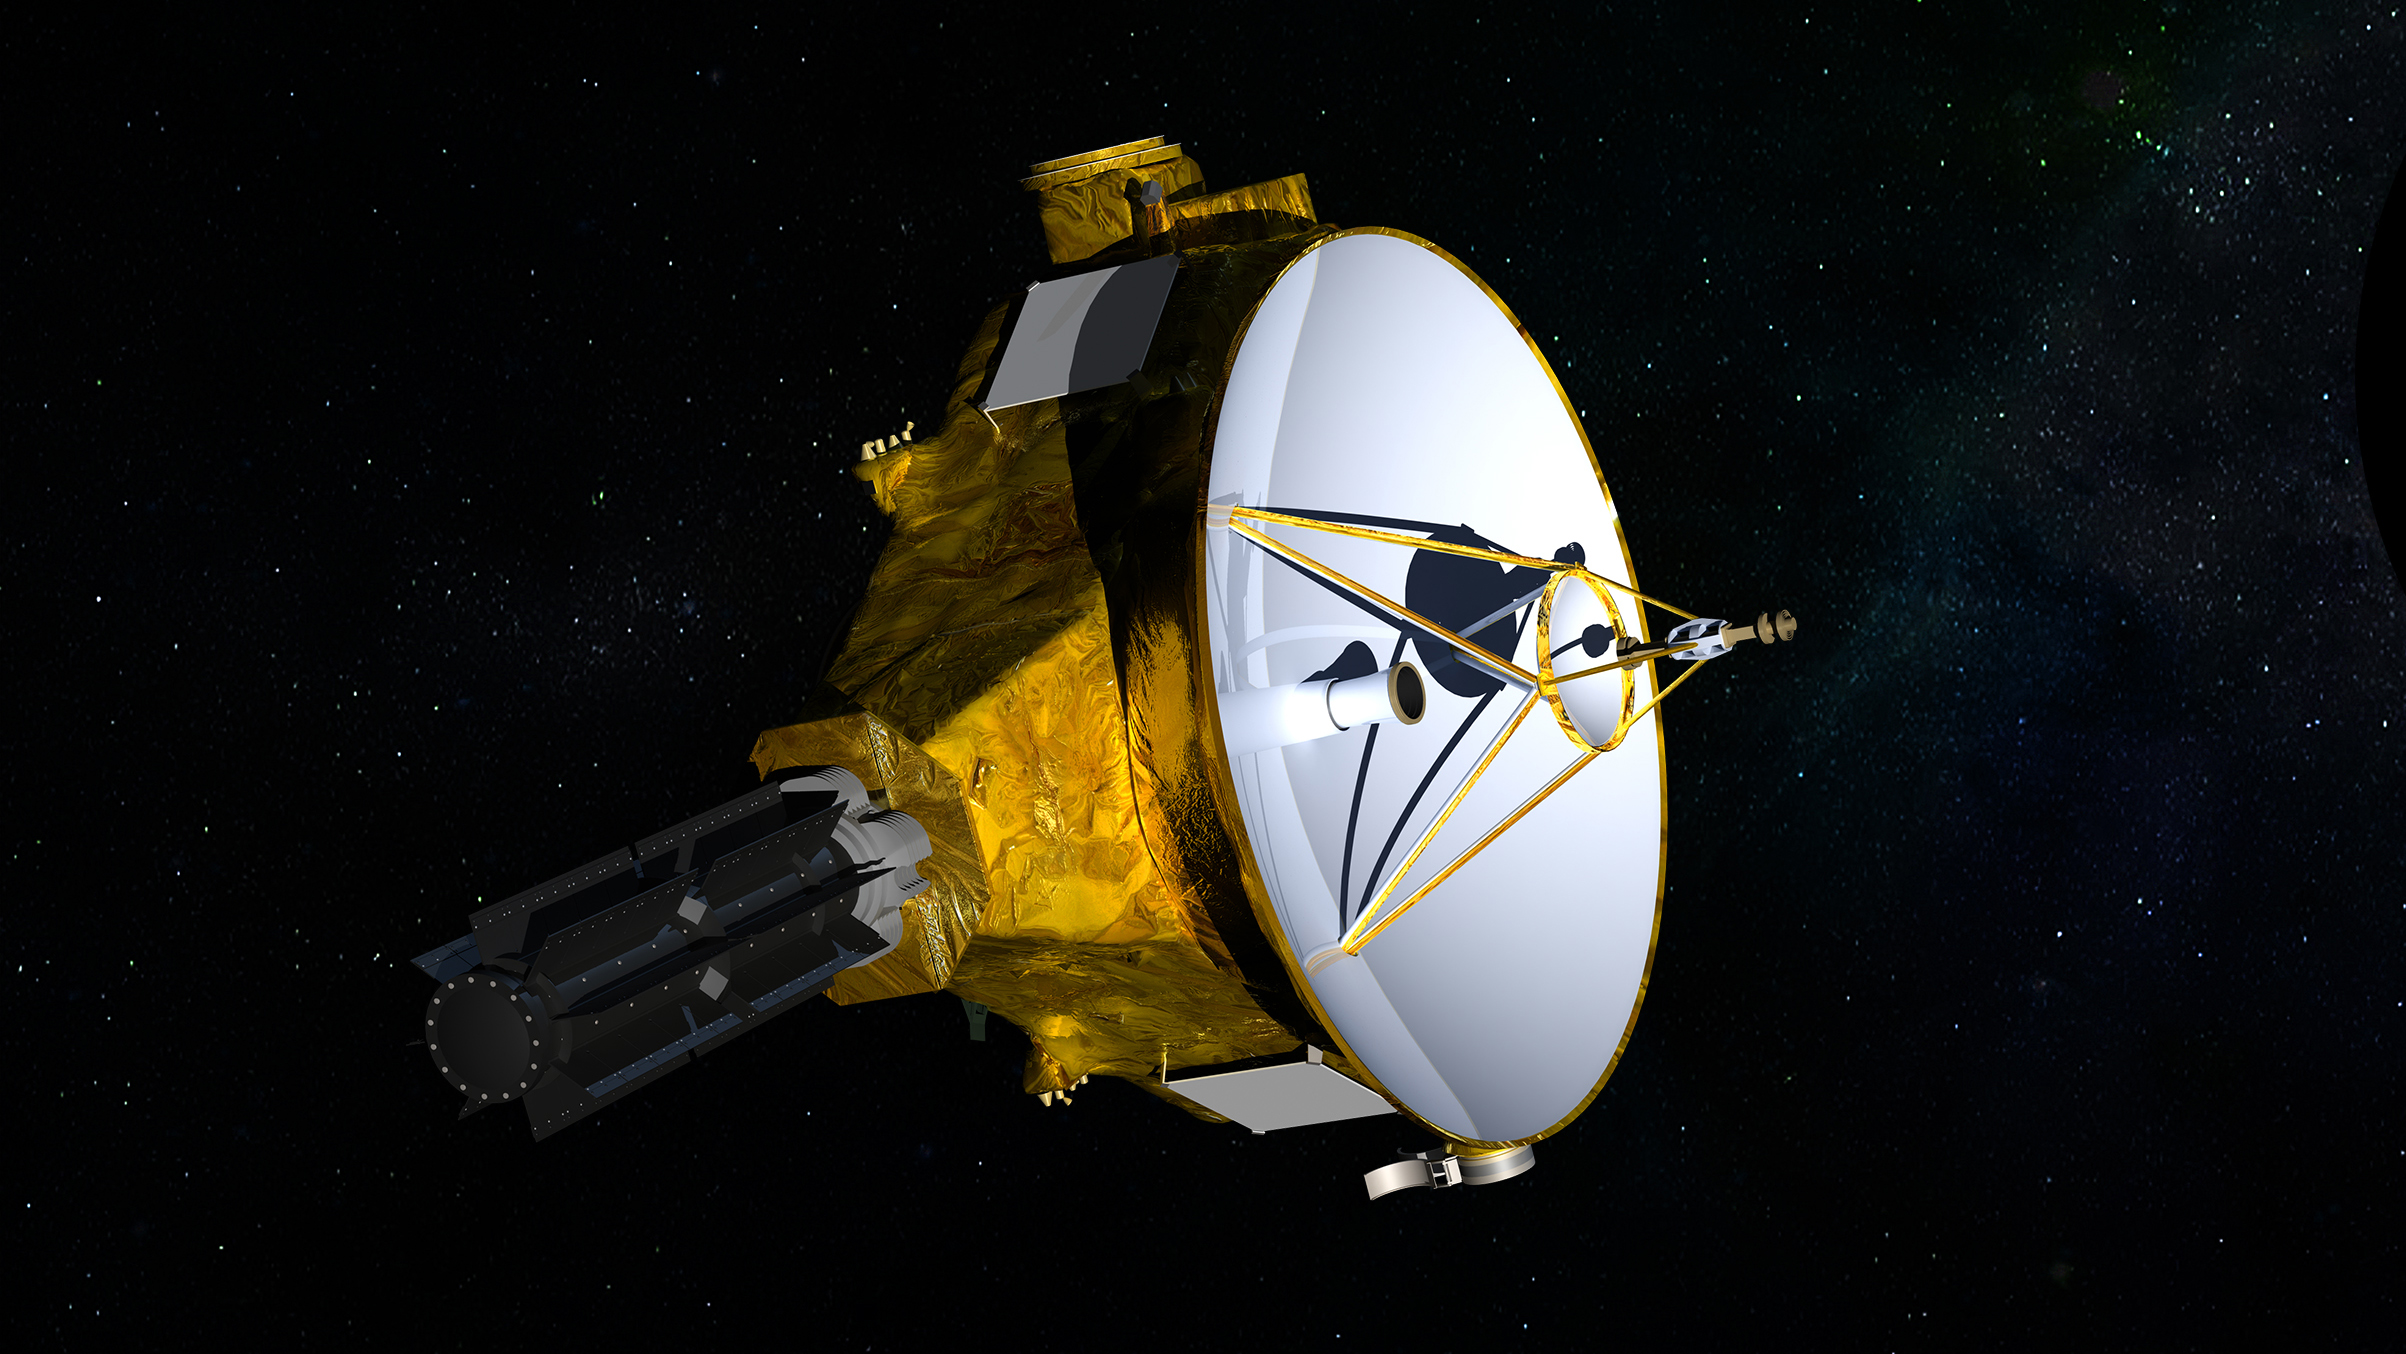 NASA’s New Horizons to Continue Exploring Outer Solar System